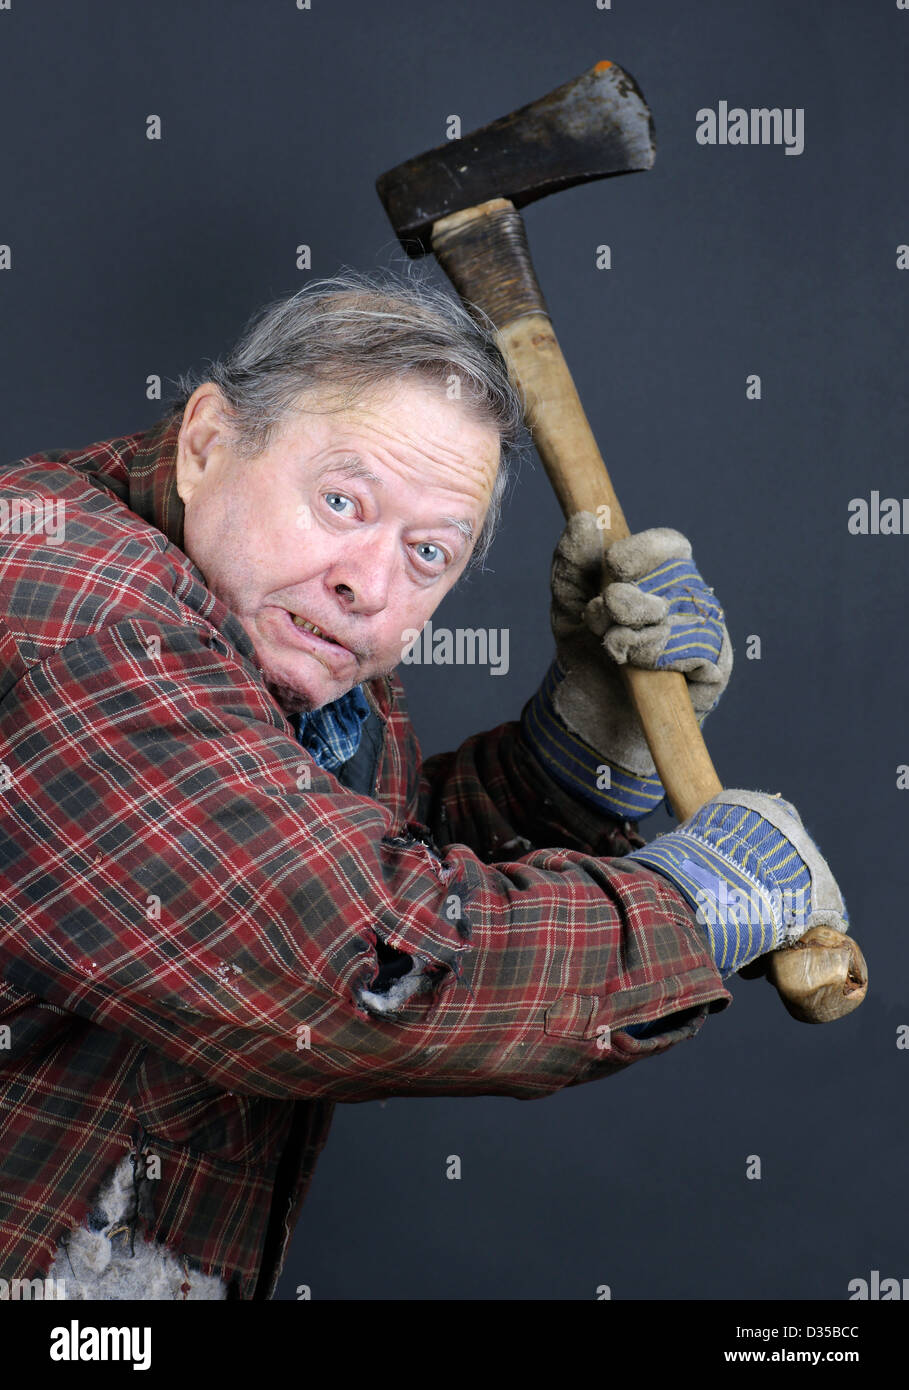 The Mad Axeman Stock Photos & The Mad Axeman Stock Images - Alamy